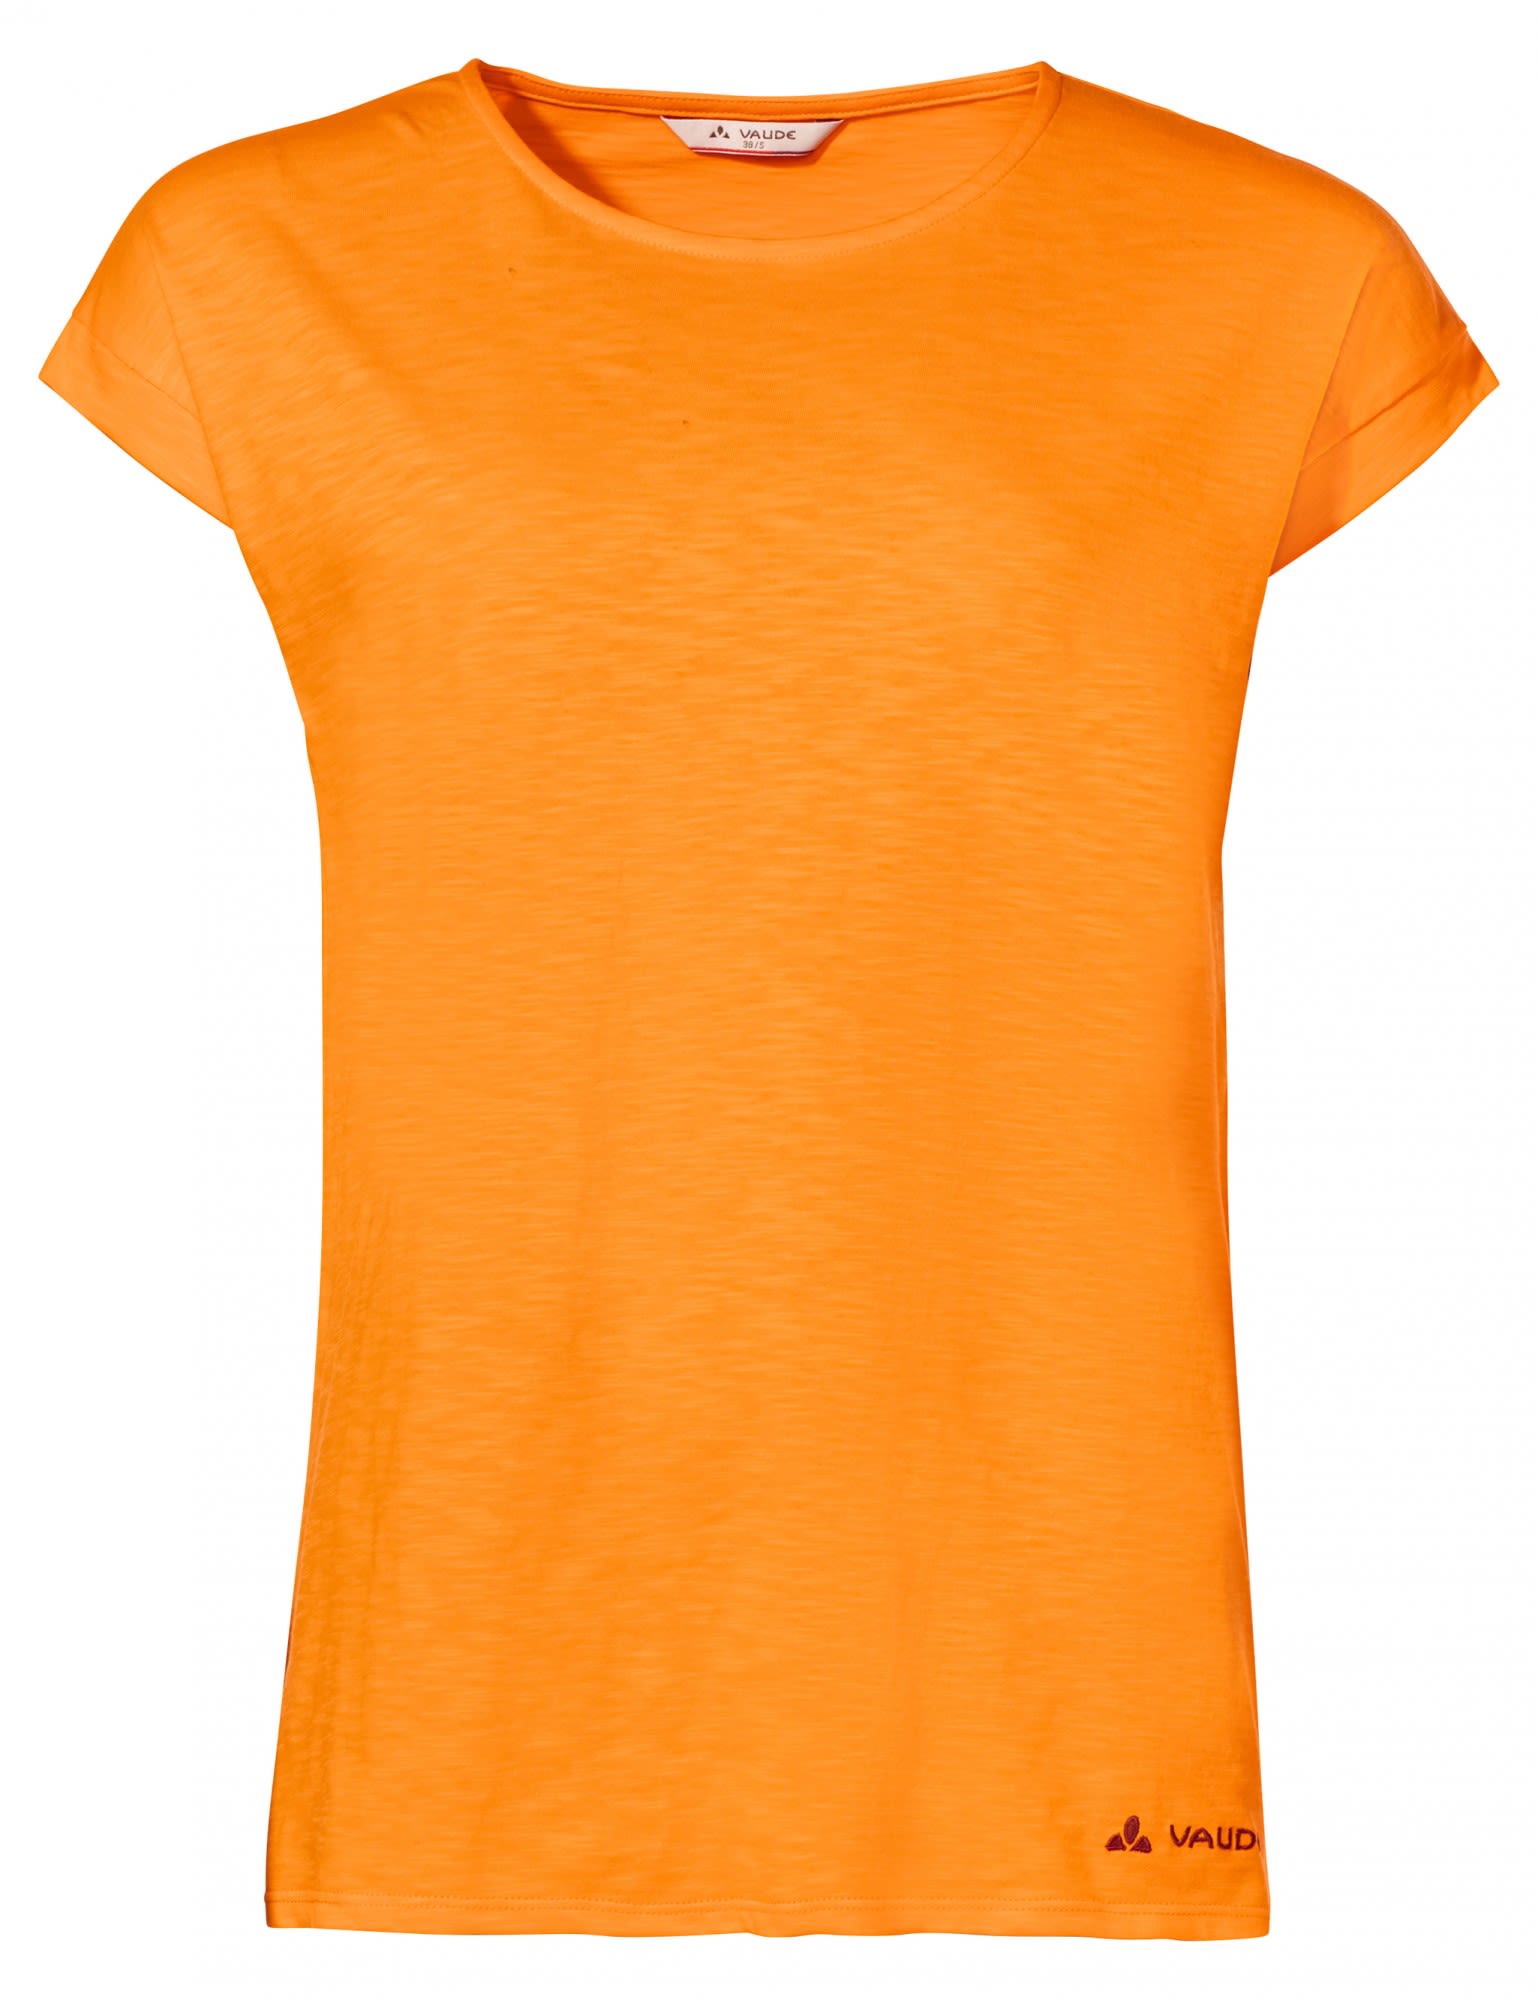 Womens at easy-care Sales comfortable Opening t-shirt. organic off Vaude 51% Coupons: cotton